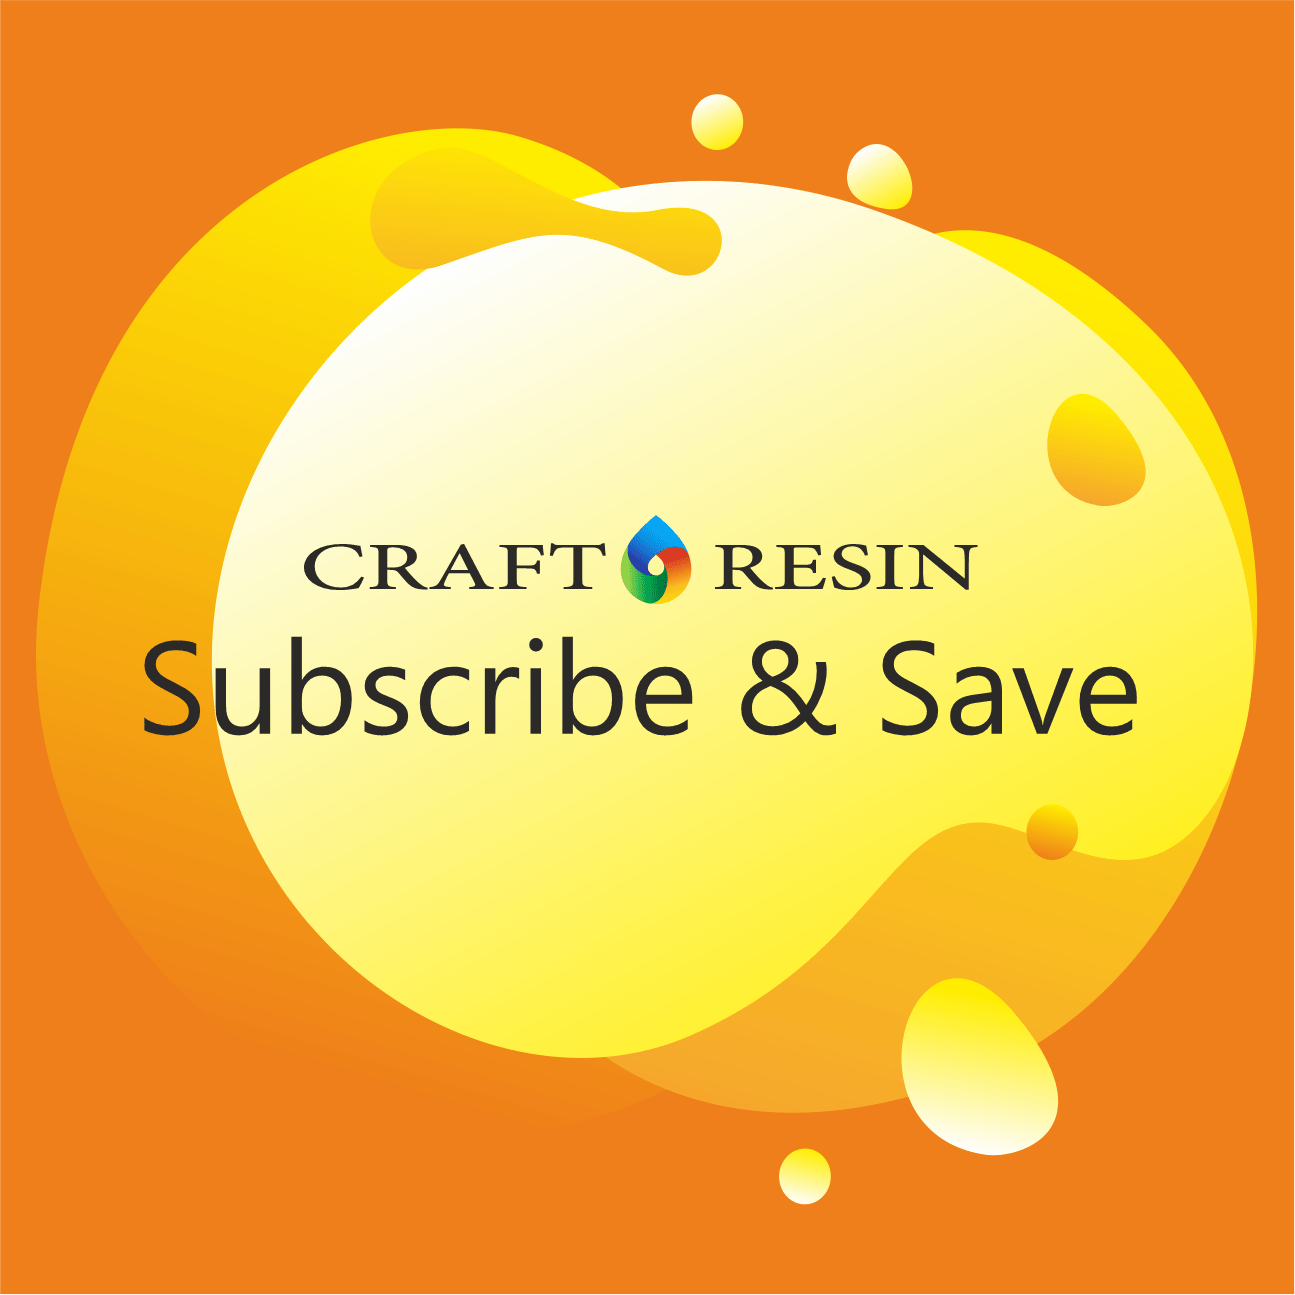 What Is The Subscribe And Save Option That Craft Resin Offers?